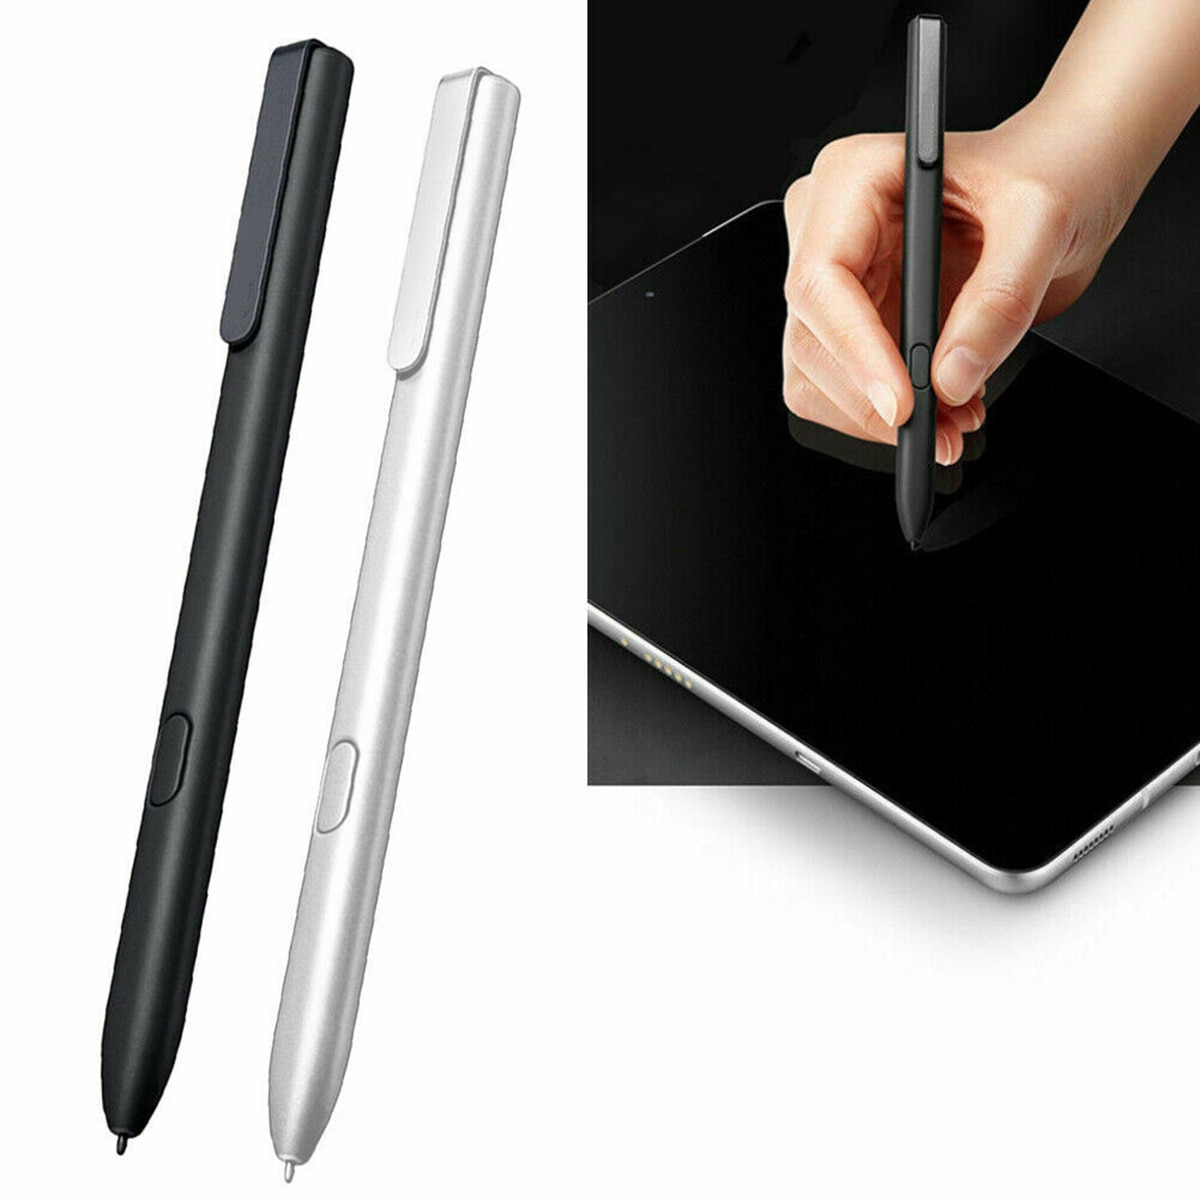 Touch Screen Stylus S Pen Drawing Pencil Capacitive Pen For Samsung Galaxy Tab S3 9.7 T820 T825 T827 Tablet Palm Rejection Pen